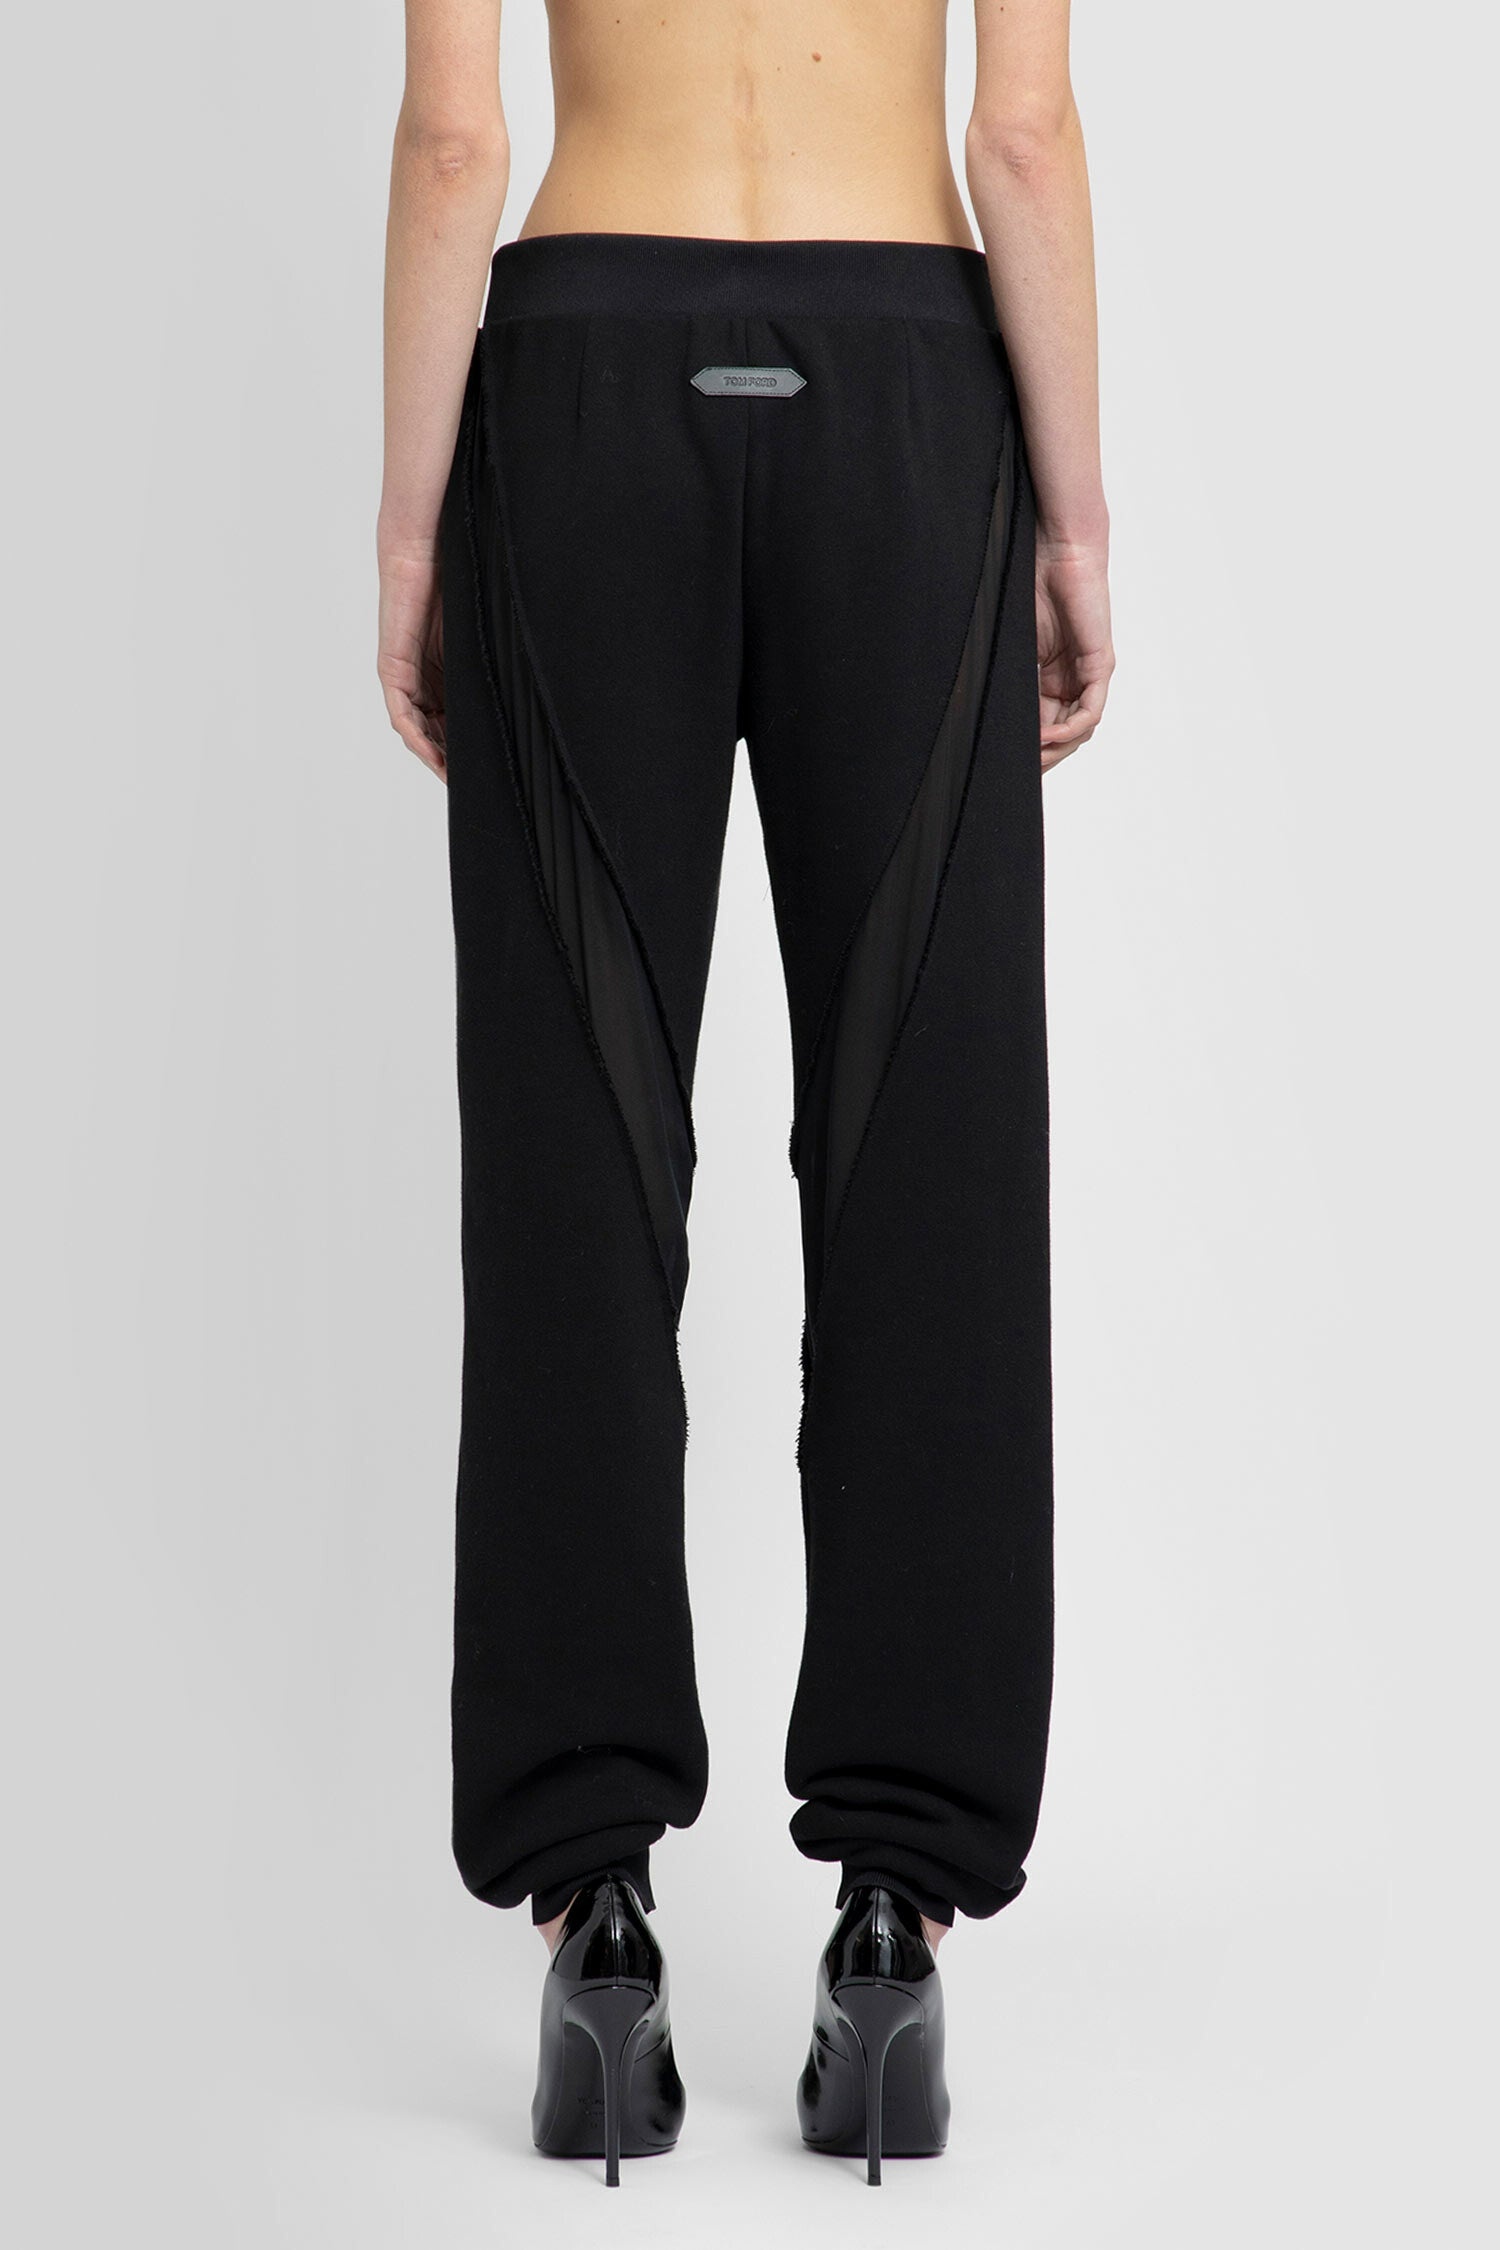 TOM FORD WOMAN BLACK TROUSERS - 4